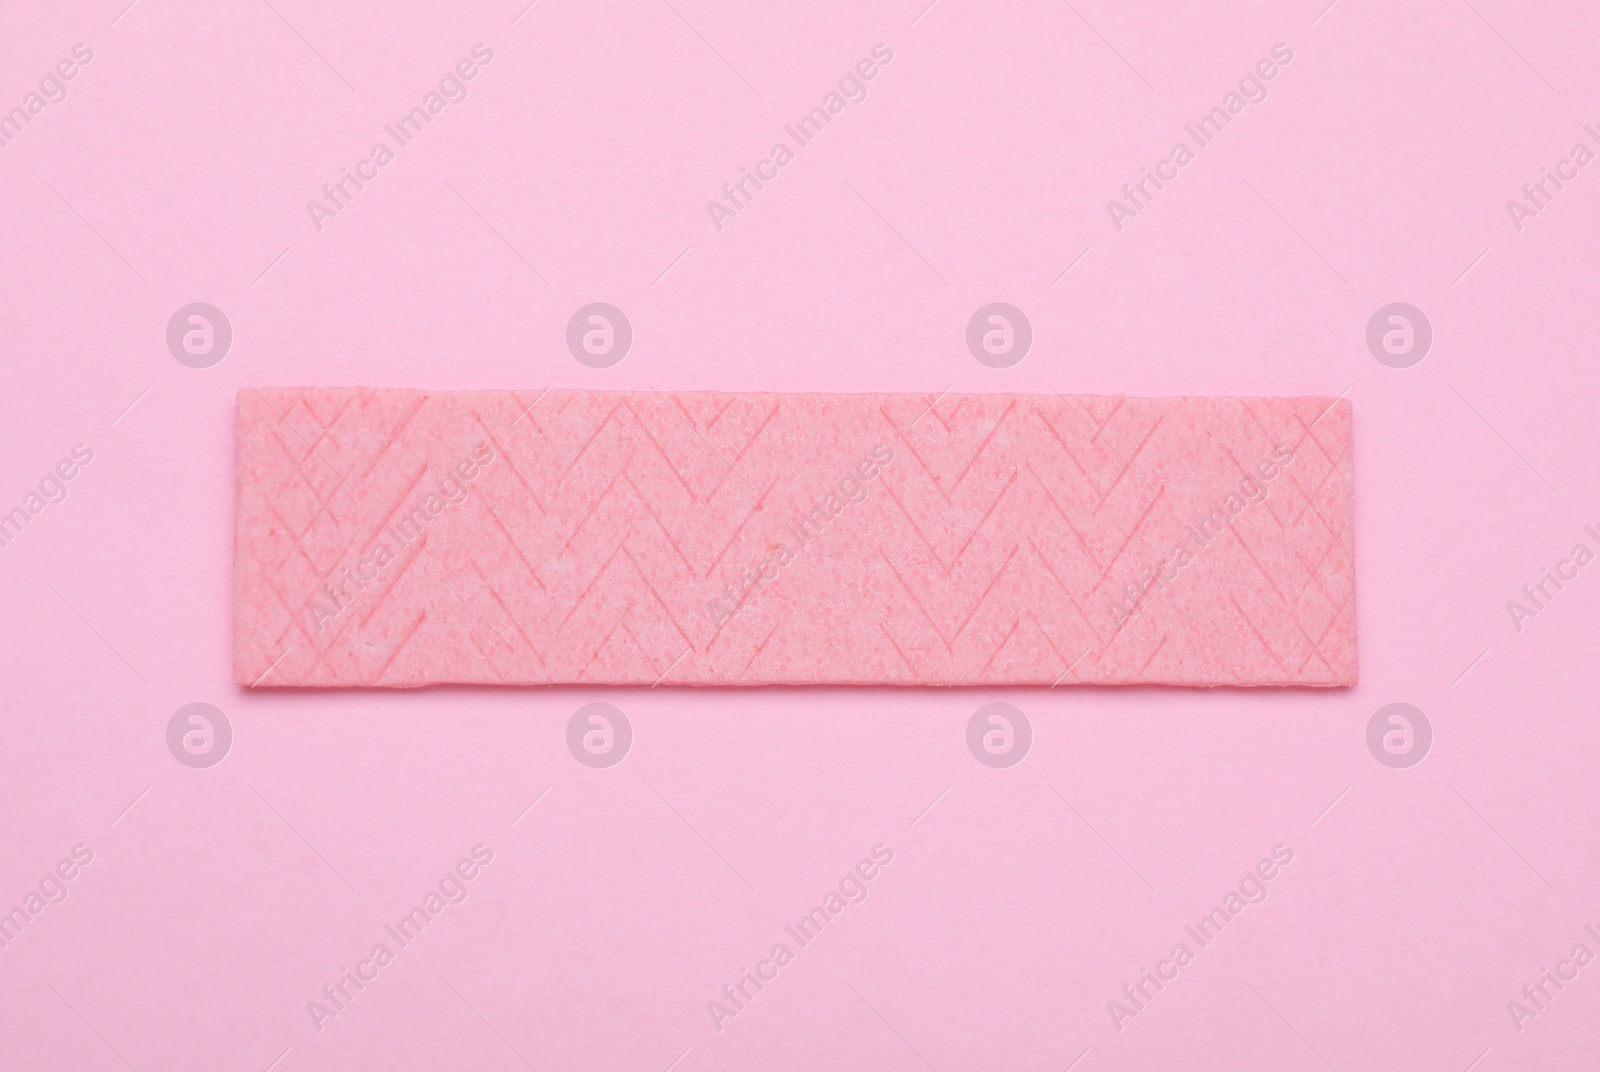 Photo of Stick of tasty chewing gum on pink background, top view